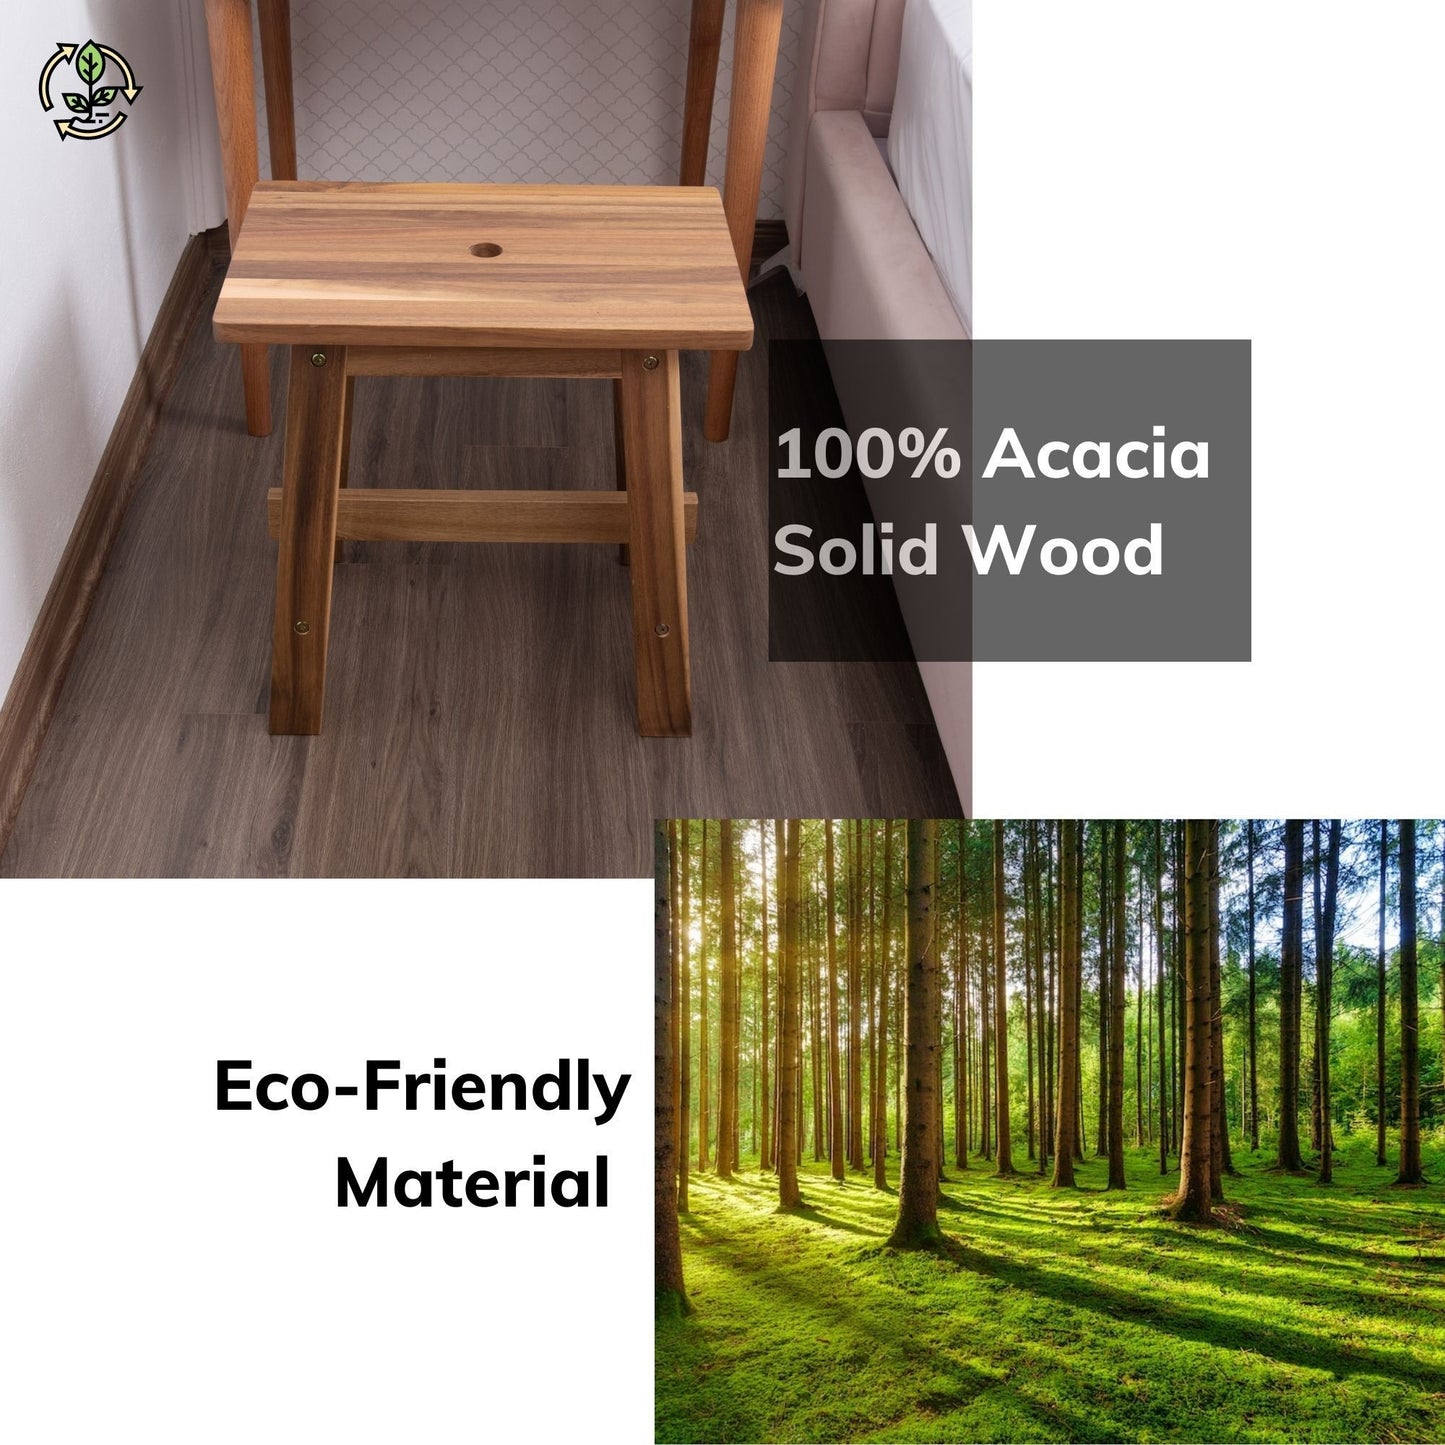 1st Choice Acacia Wood Stool Rectangle End Table in Natural Color